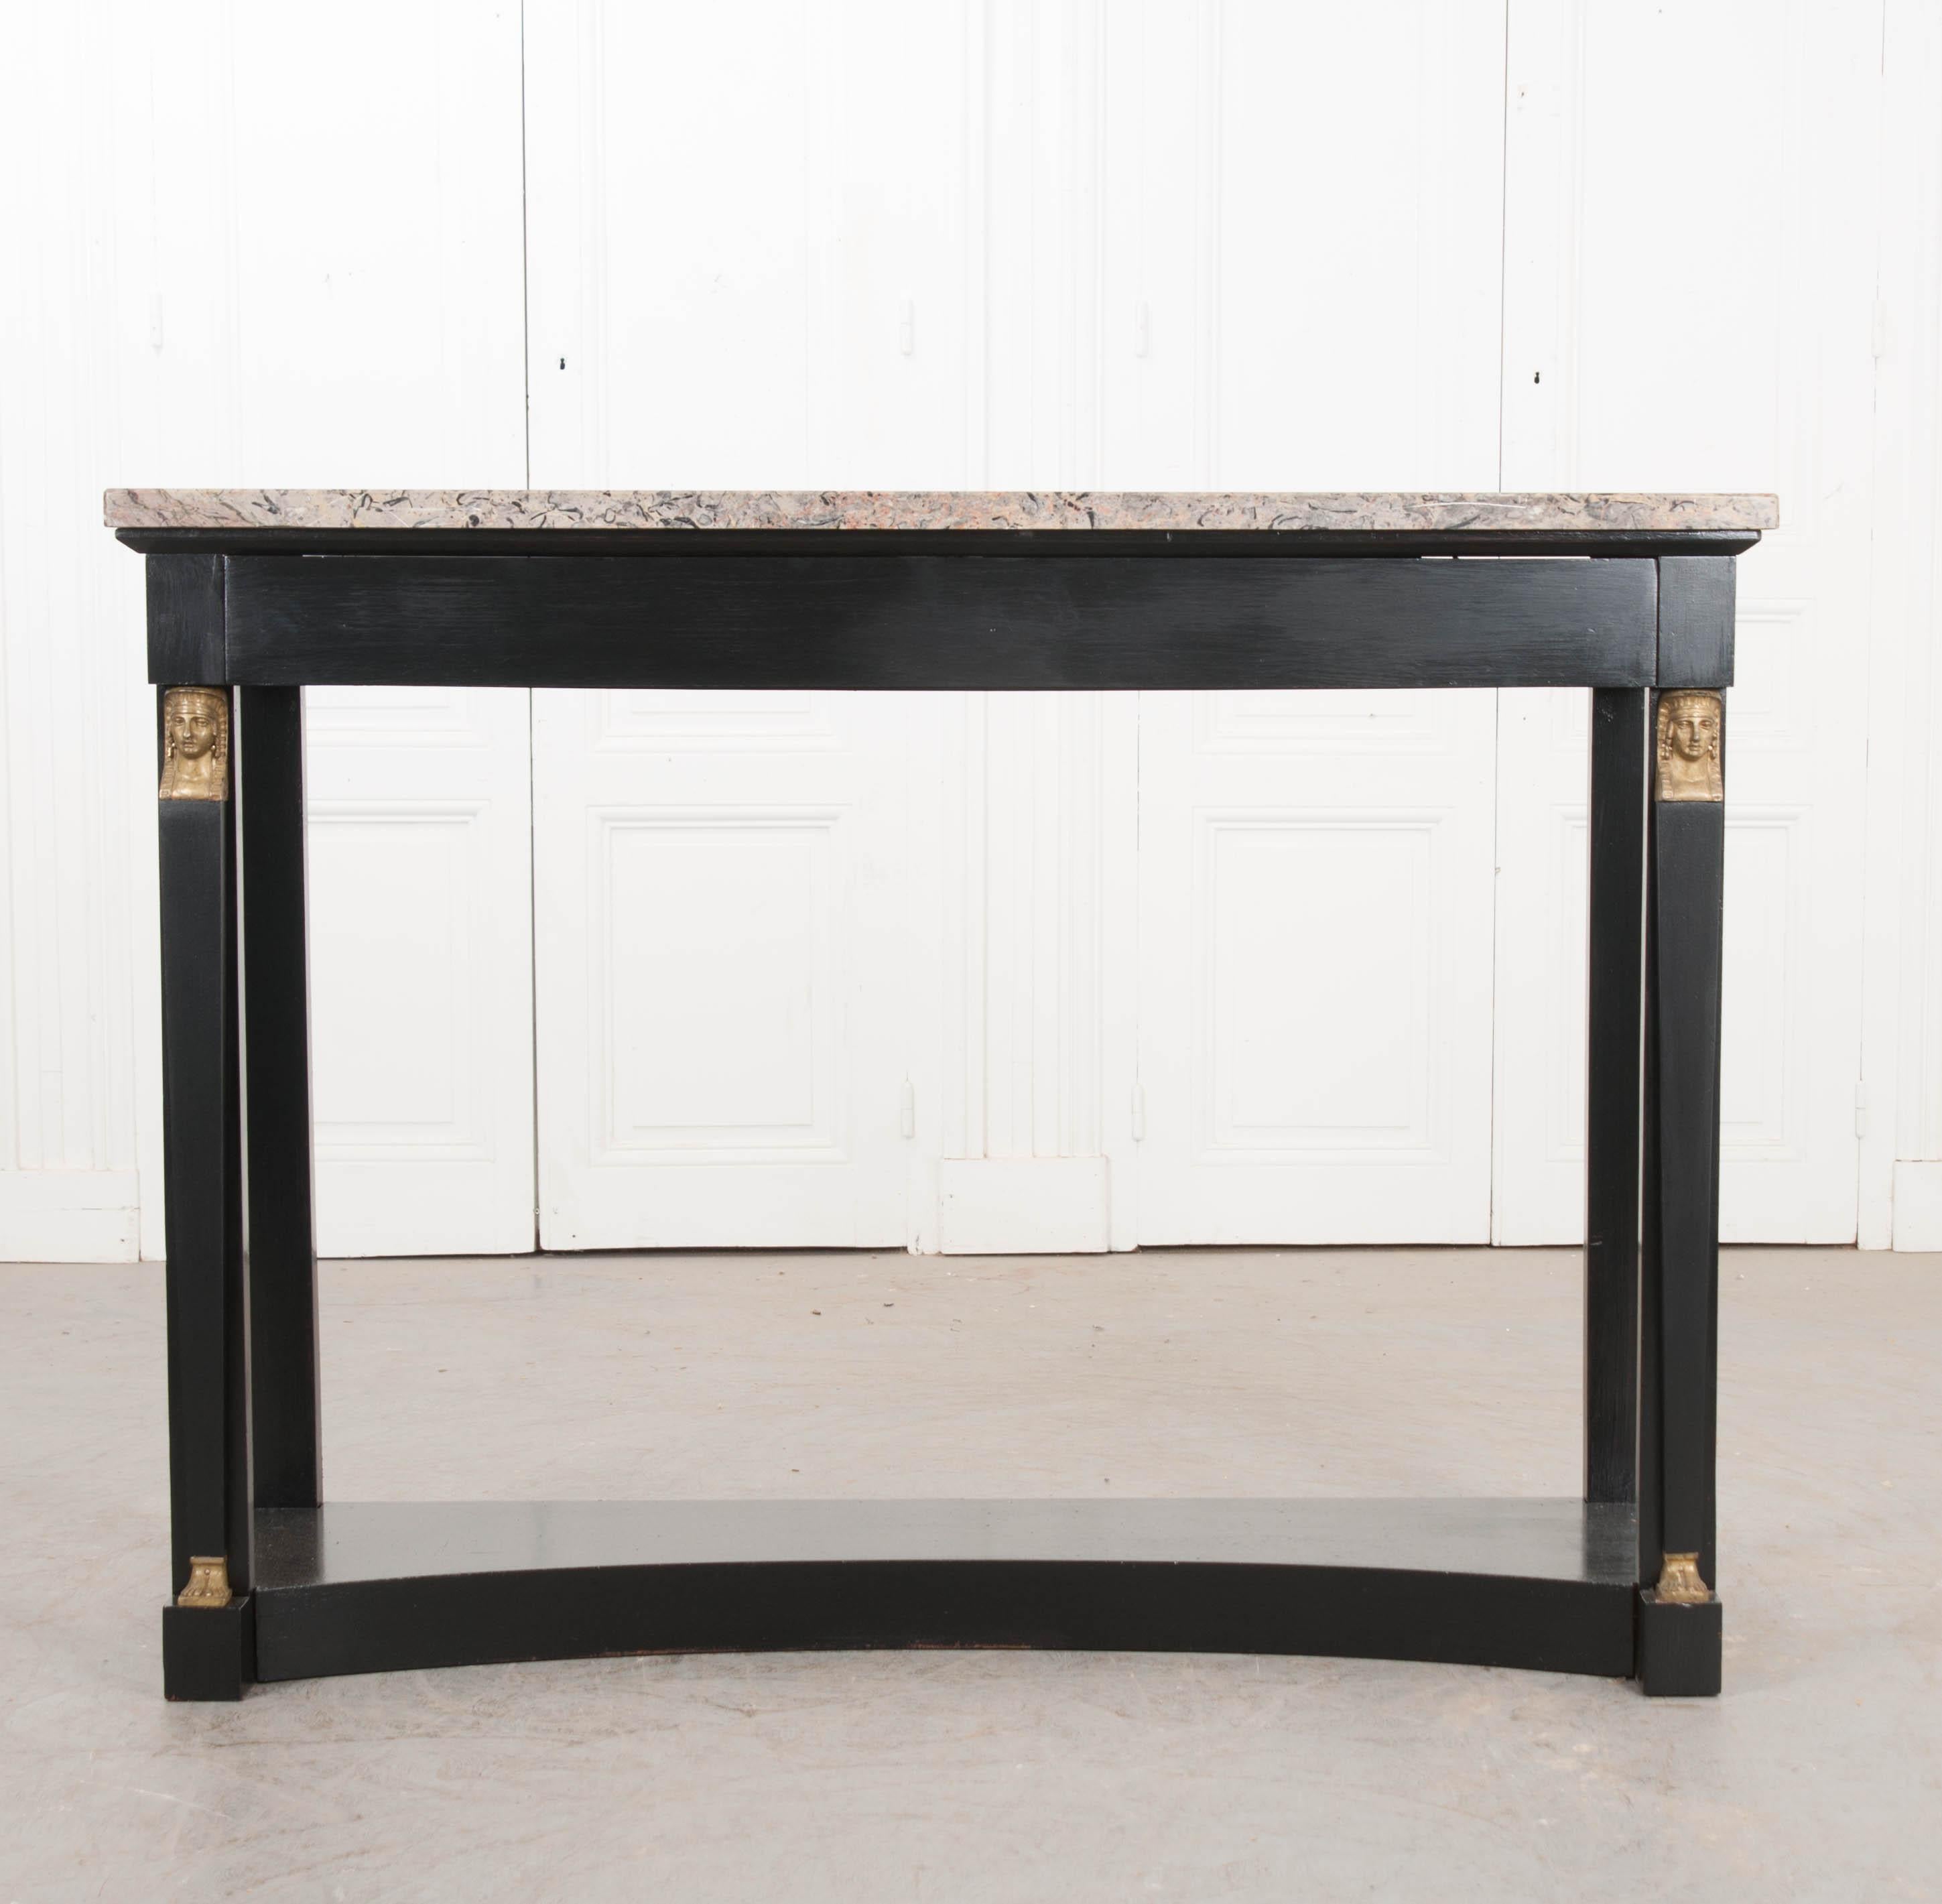 This Classic Empire-style ebonized and marble-top console table, circa 1870, is from France. The beautiful marble top includes shades of grey, beige, rose, and black. Highlighting the clean lines of this console are female gilt brass terms. Of